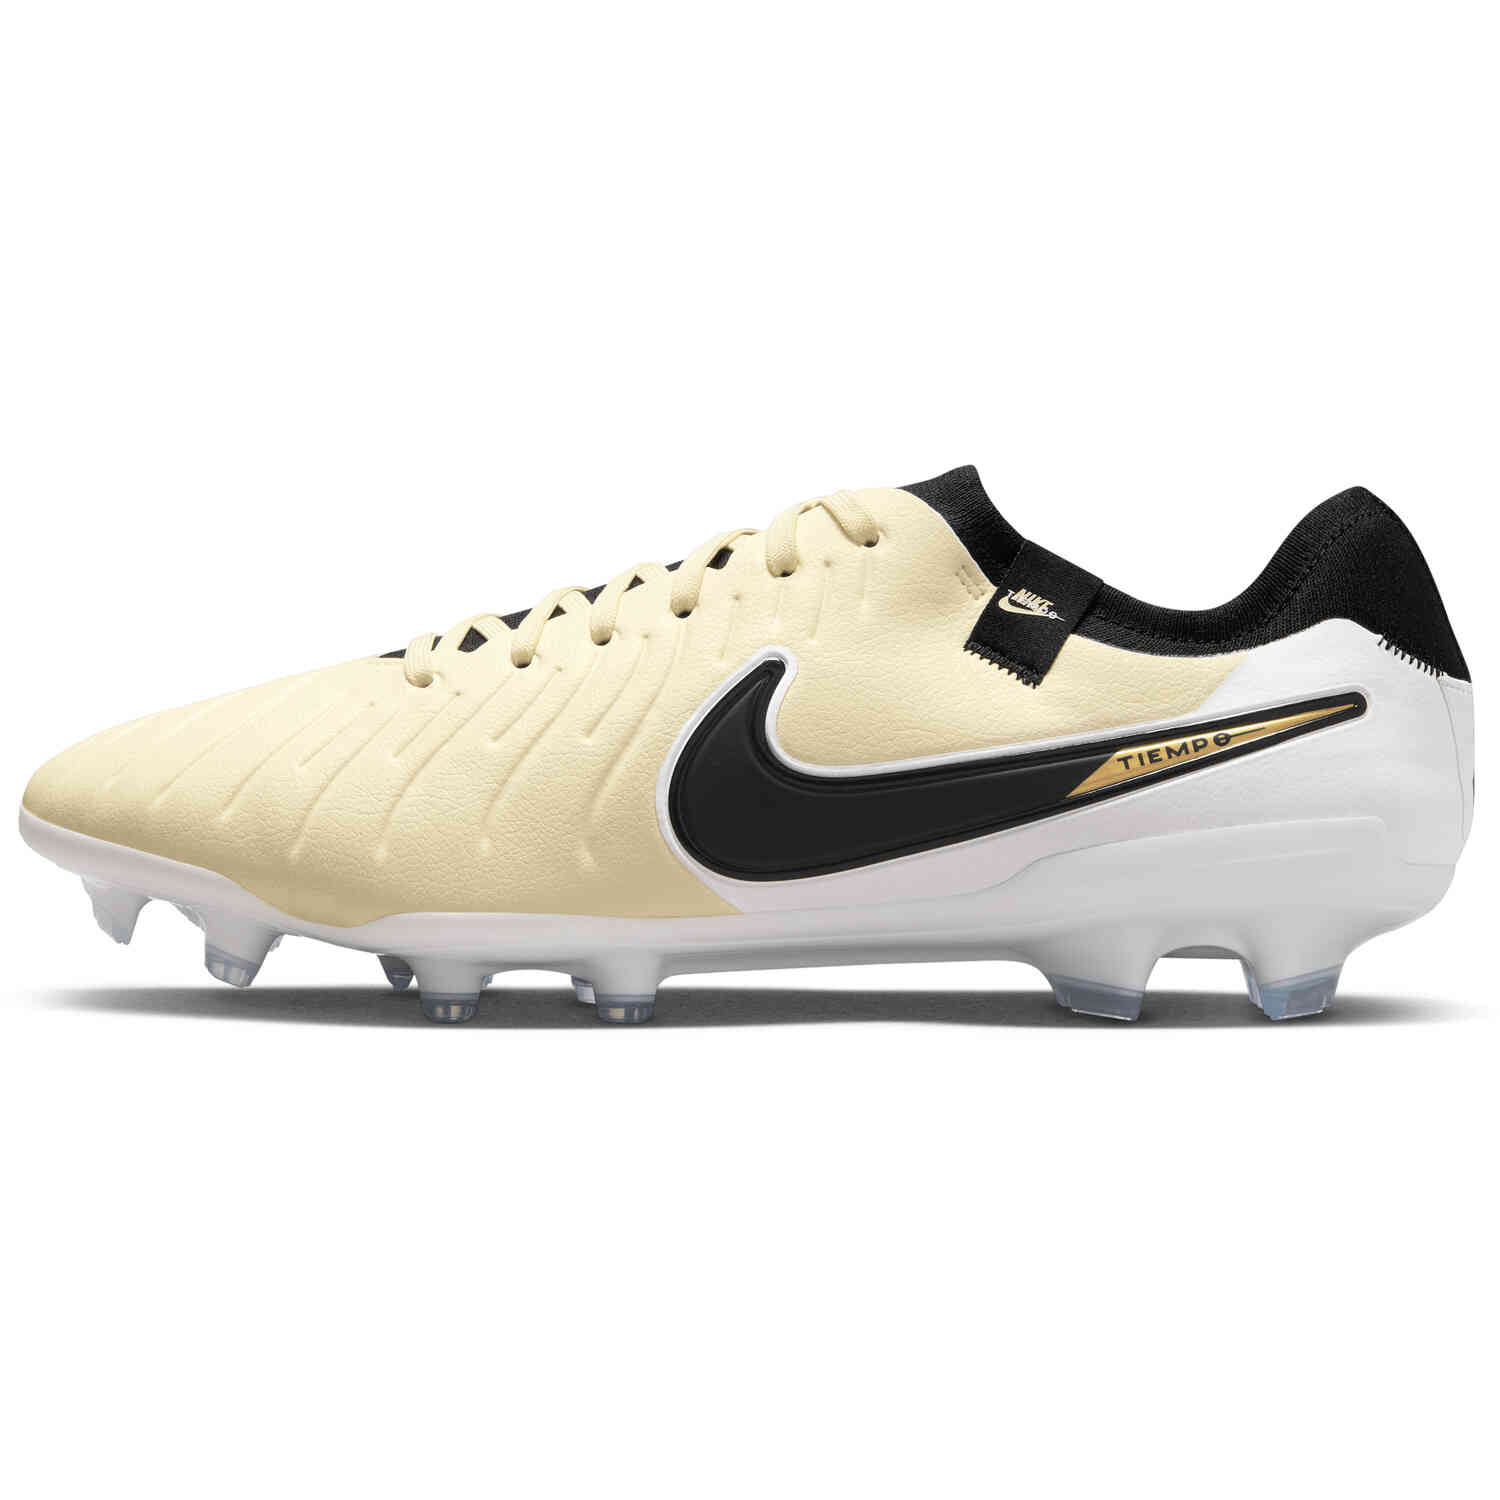 Nike Tiempo Legend 10 Pro FG Firm Ground - Mad Ready Pack - SoccerPro